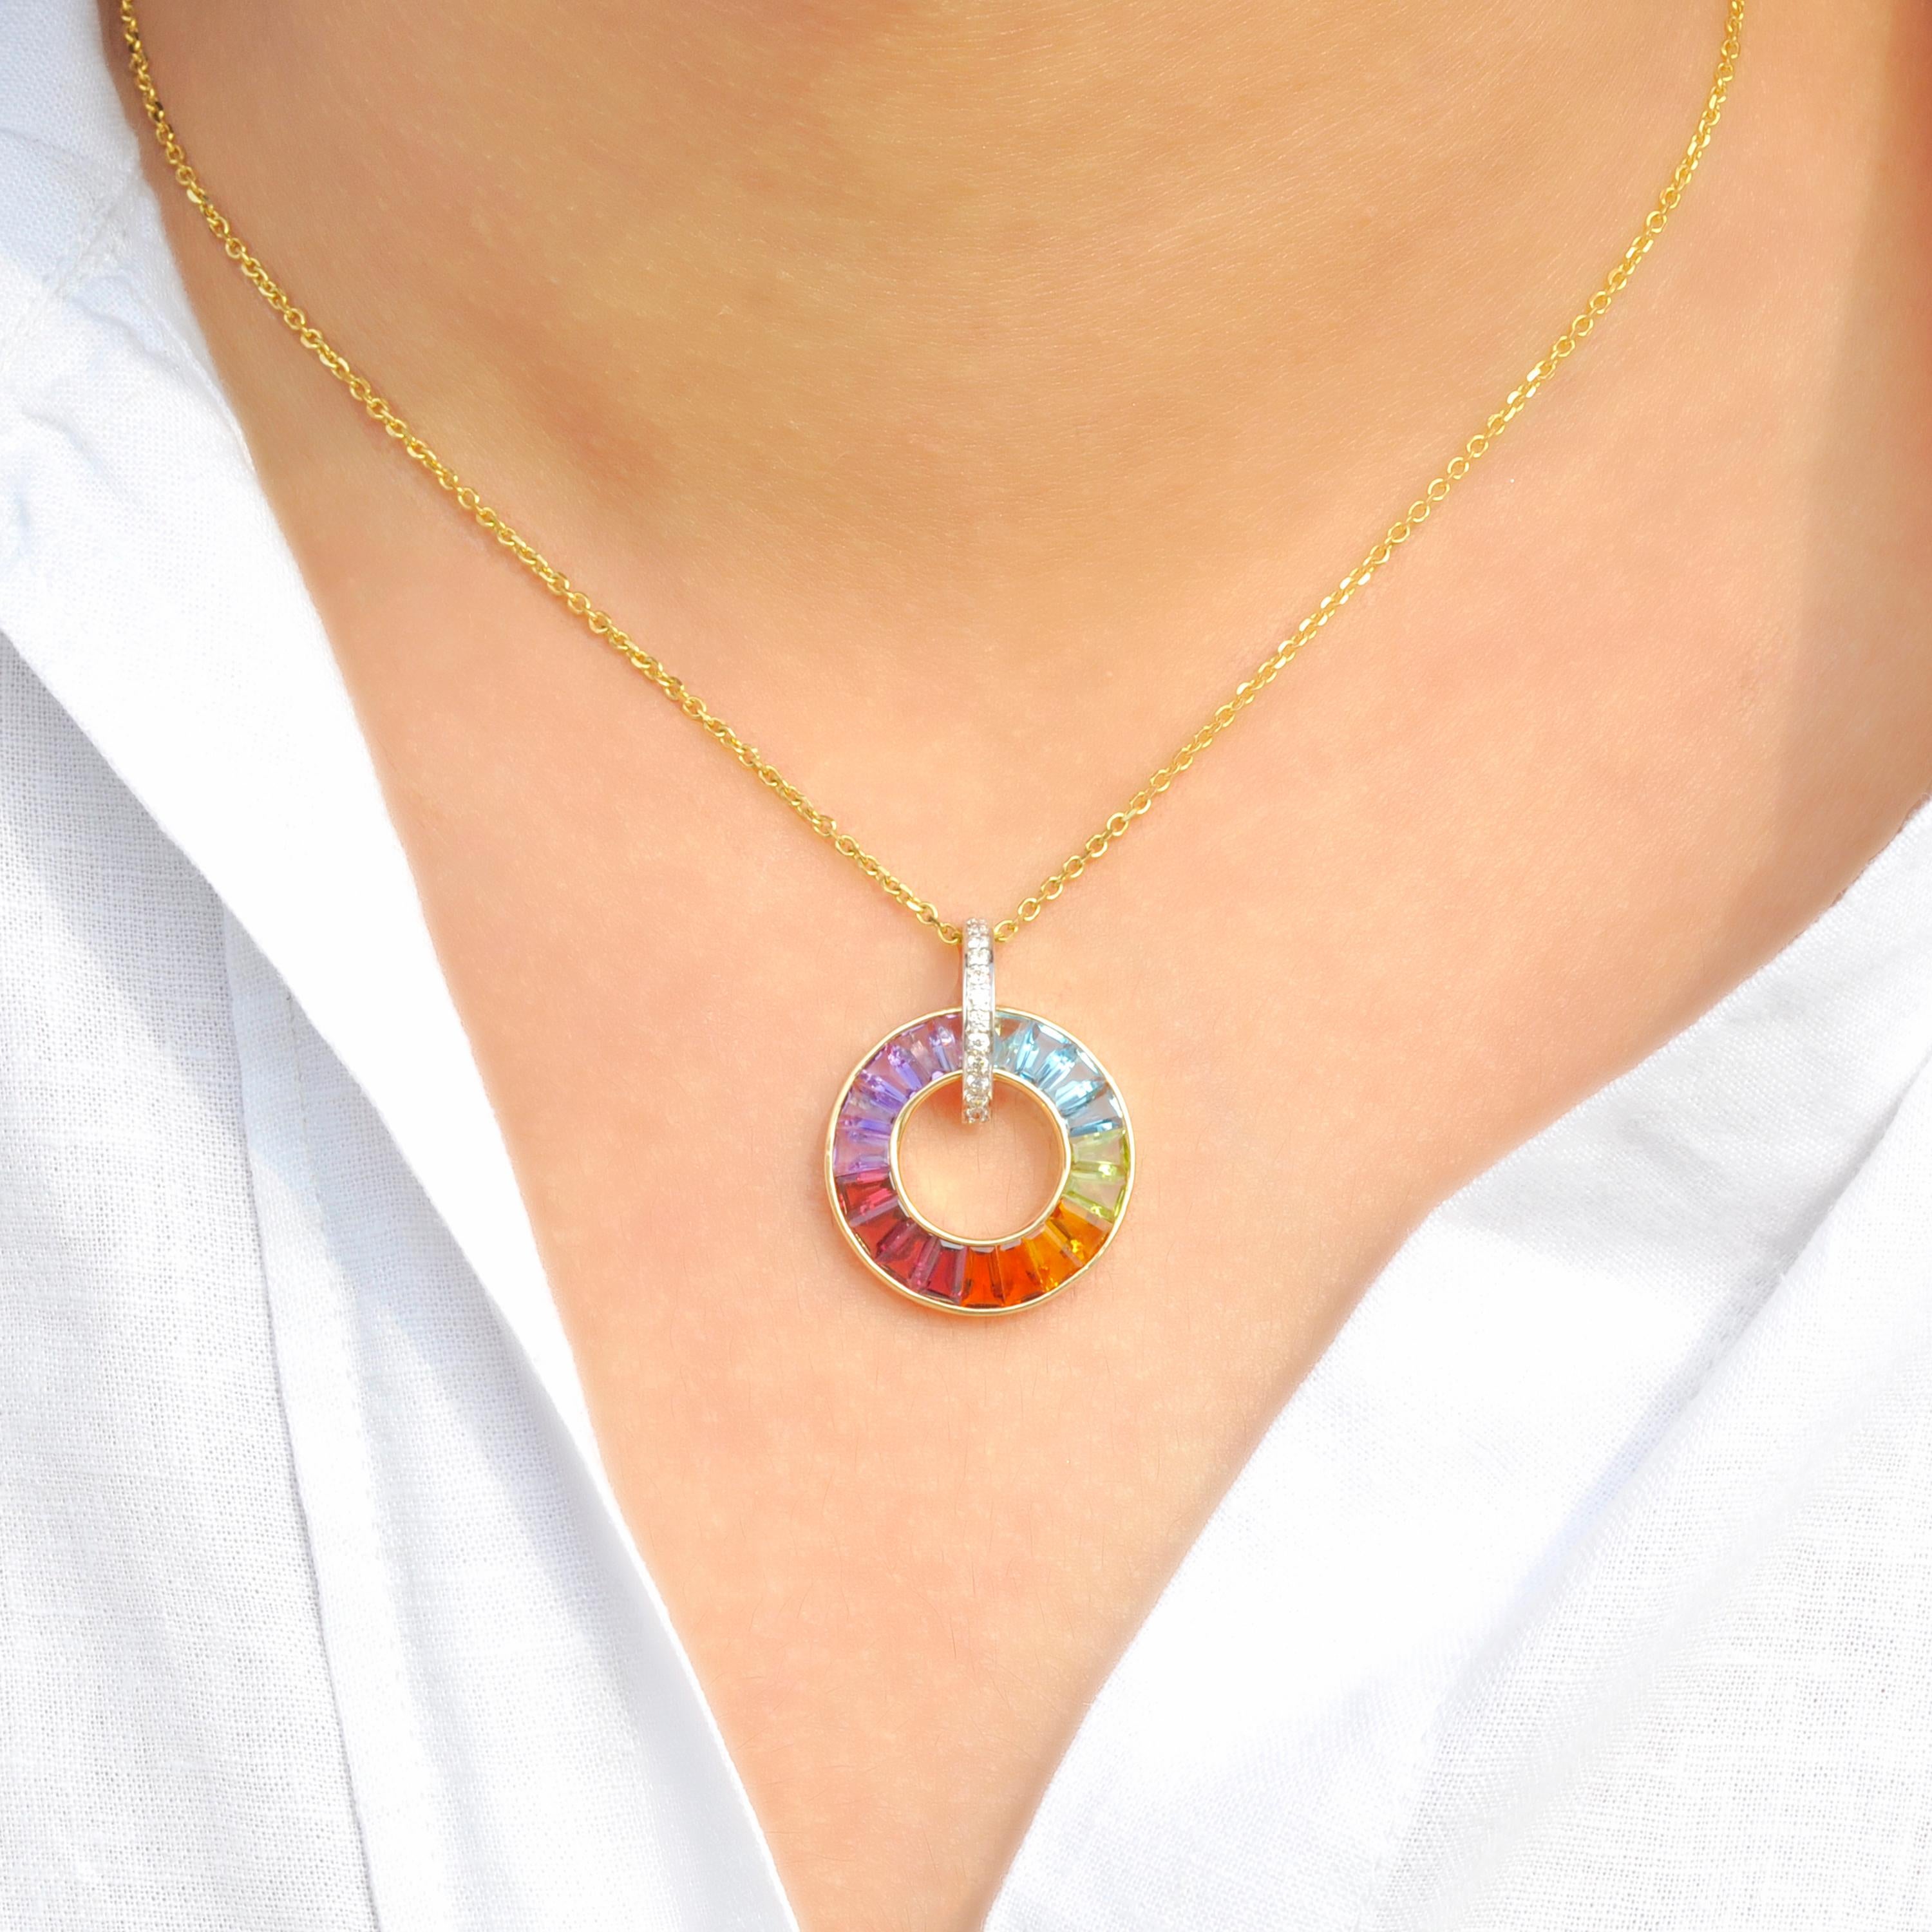 This extraordinary 18k gold tapered cut rainbow gemstones diamond art deco inspired circle pendant necklace is a celebration of vibrant hues and unparalleled sophistication. Crafted in luxurious 18-karat gold, this pendant features a captivating